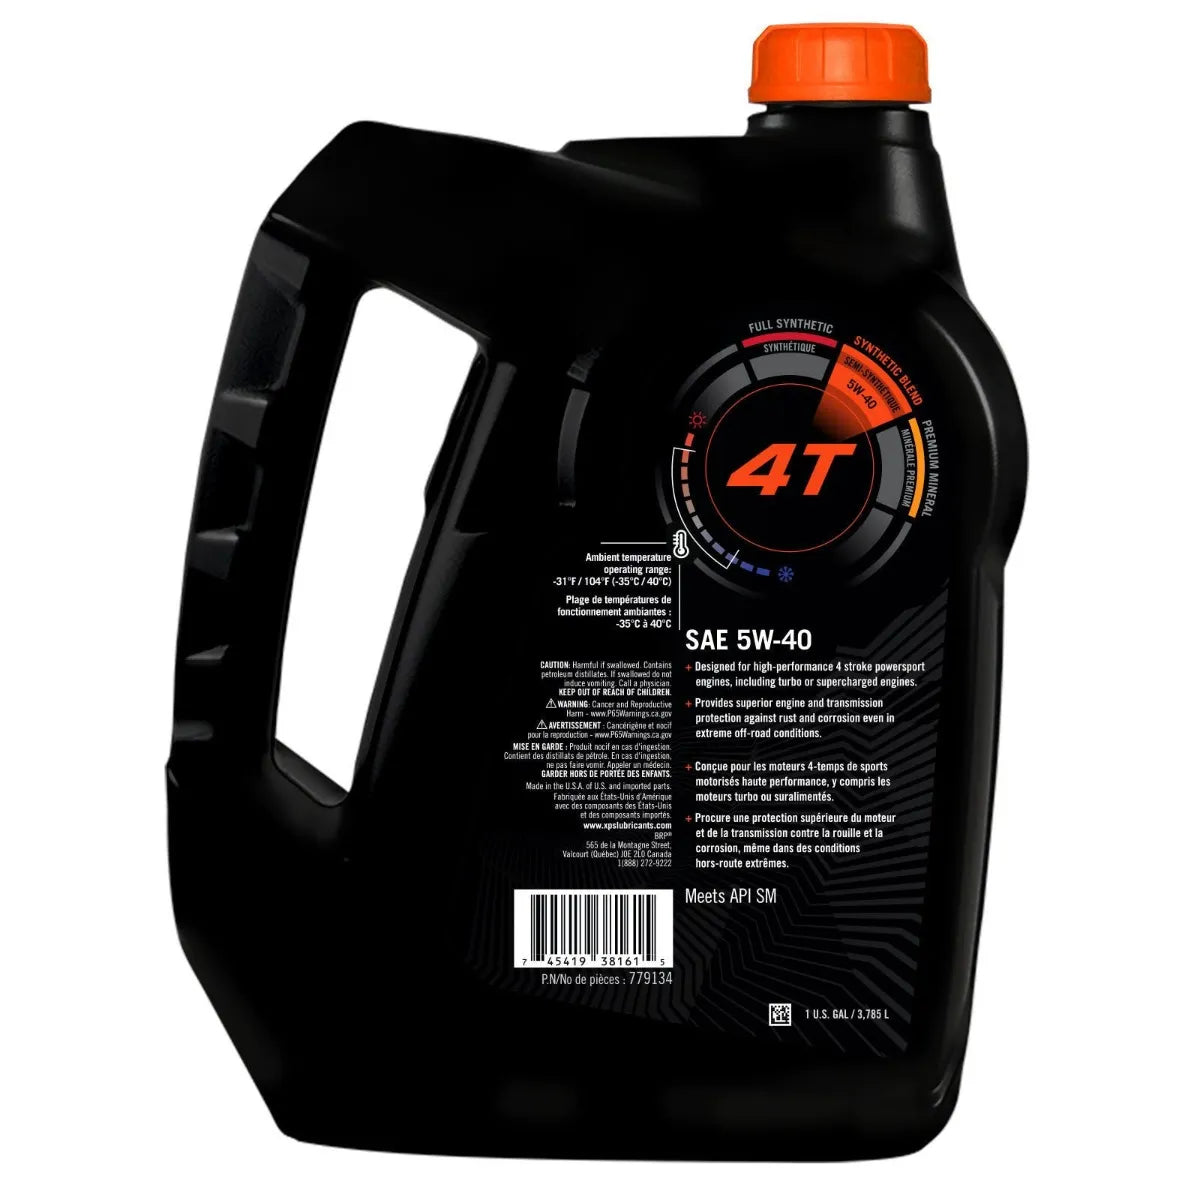 Sea-Doo XPS 4T 5W40 Synthetic Blend Oil